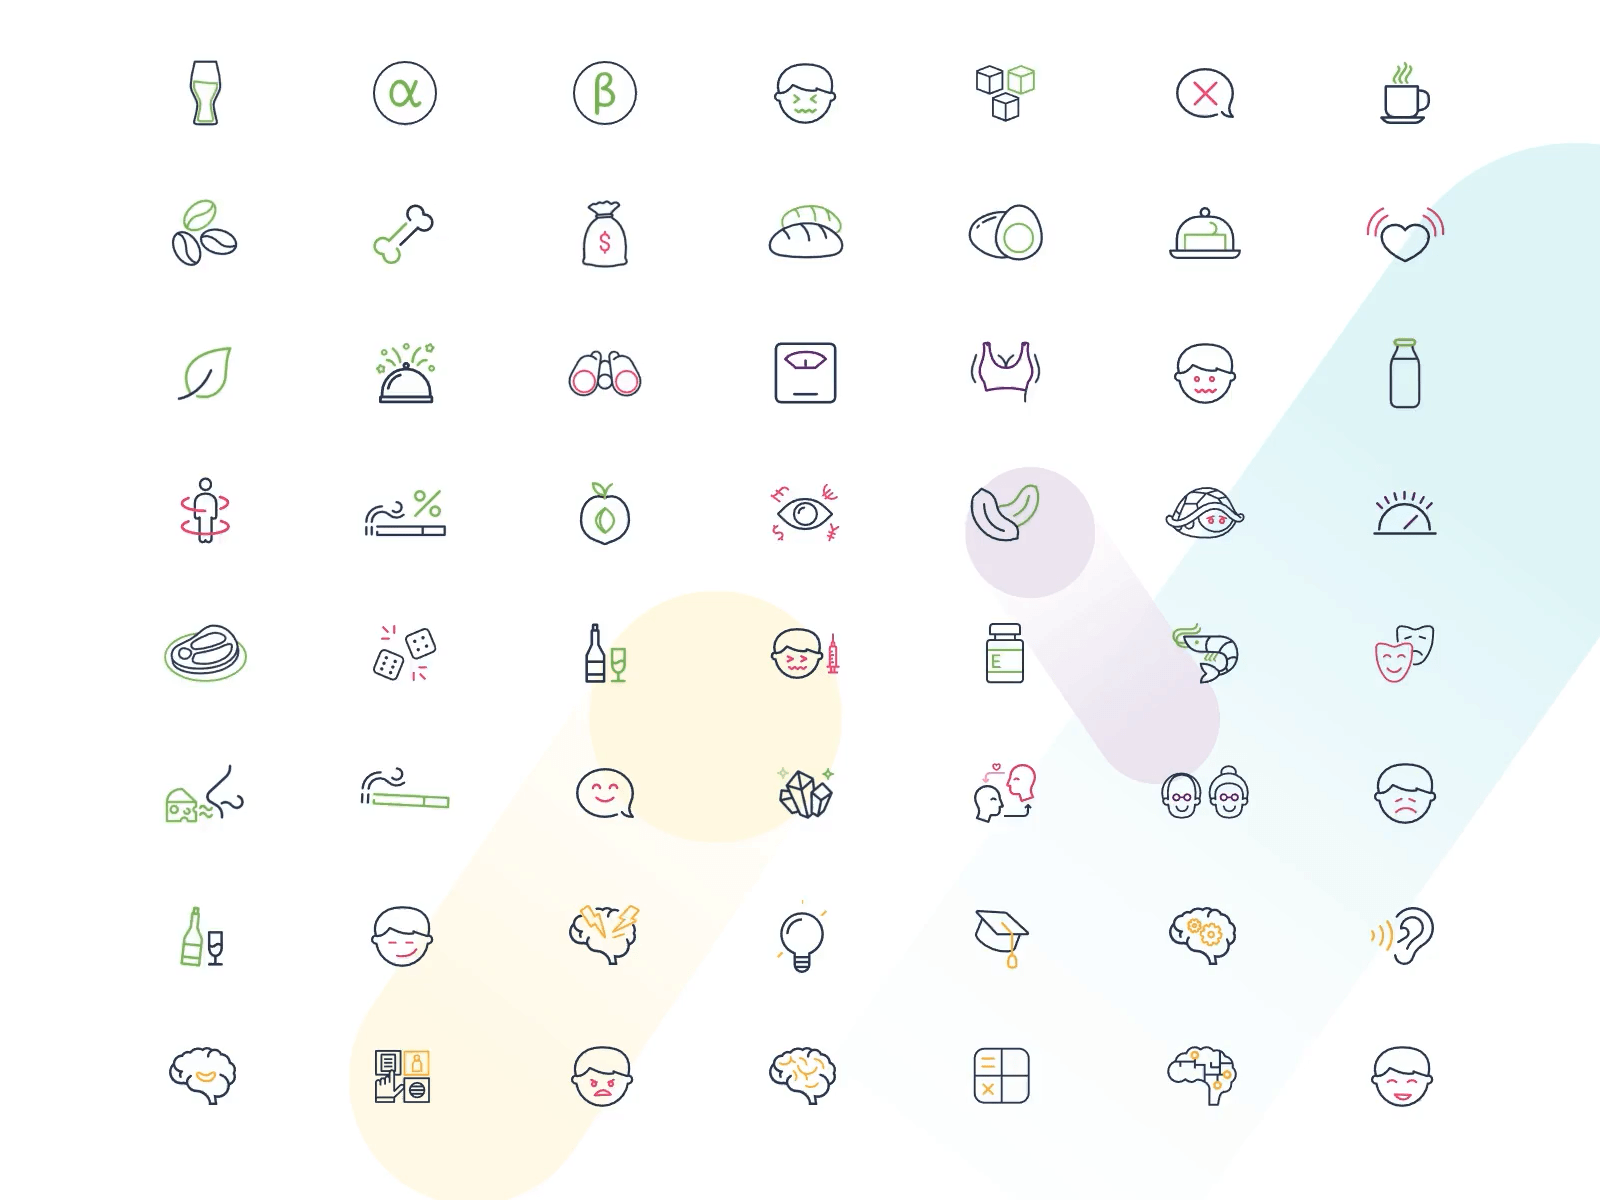 Genomelink Animations by Stas Kulesh 🥝 on Dribbble